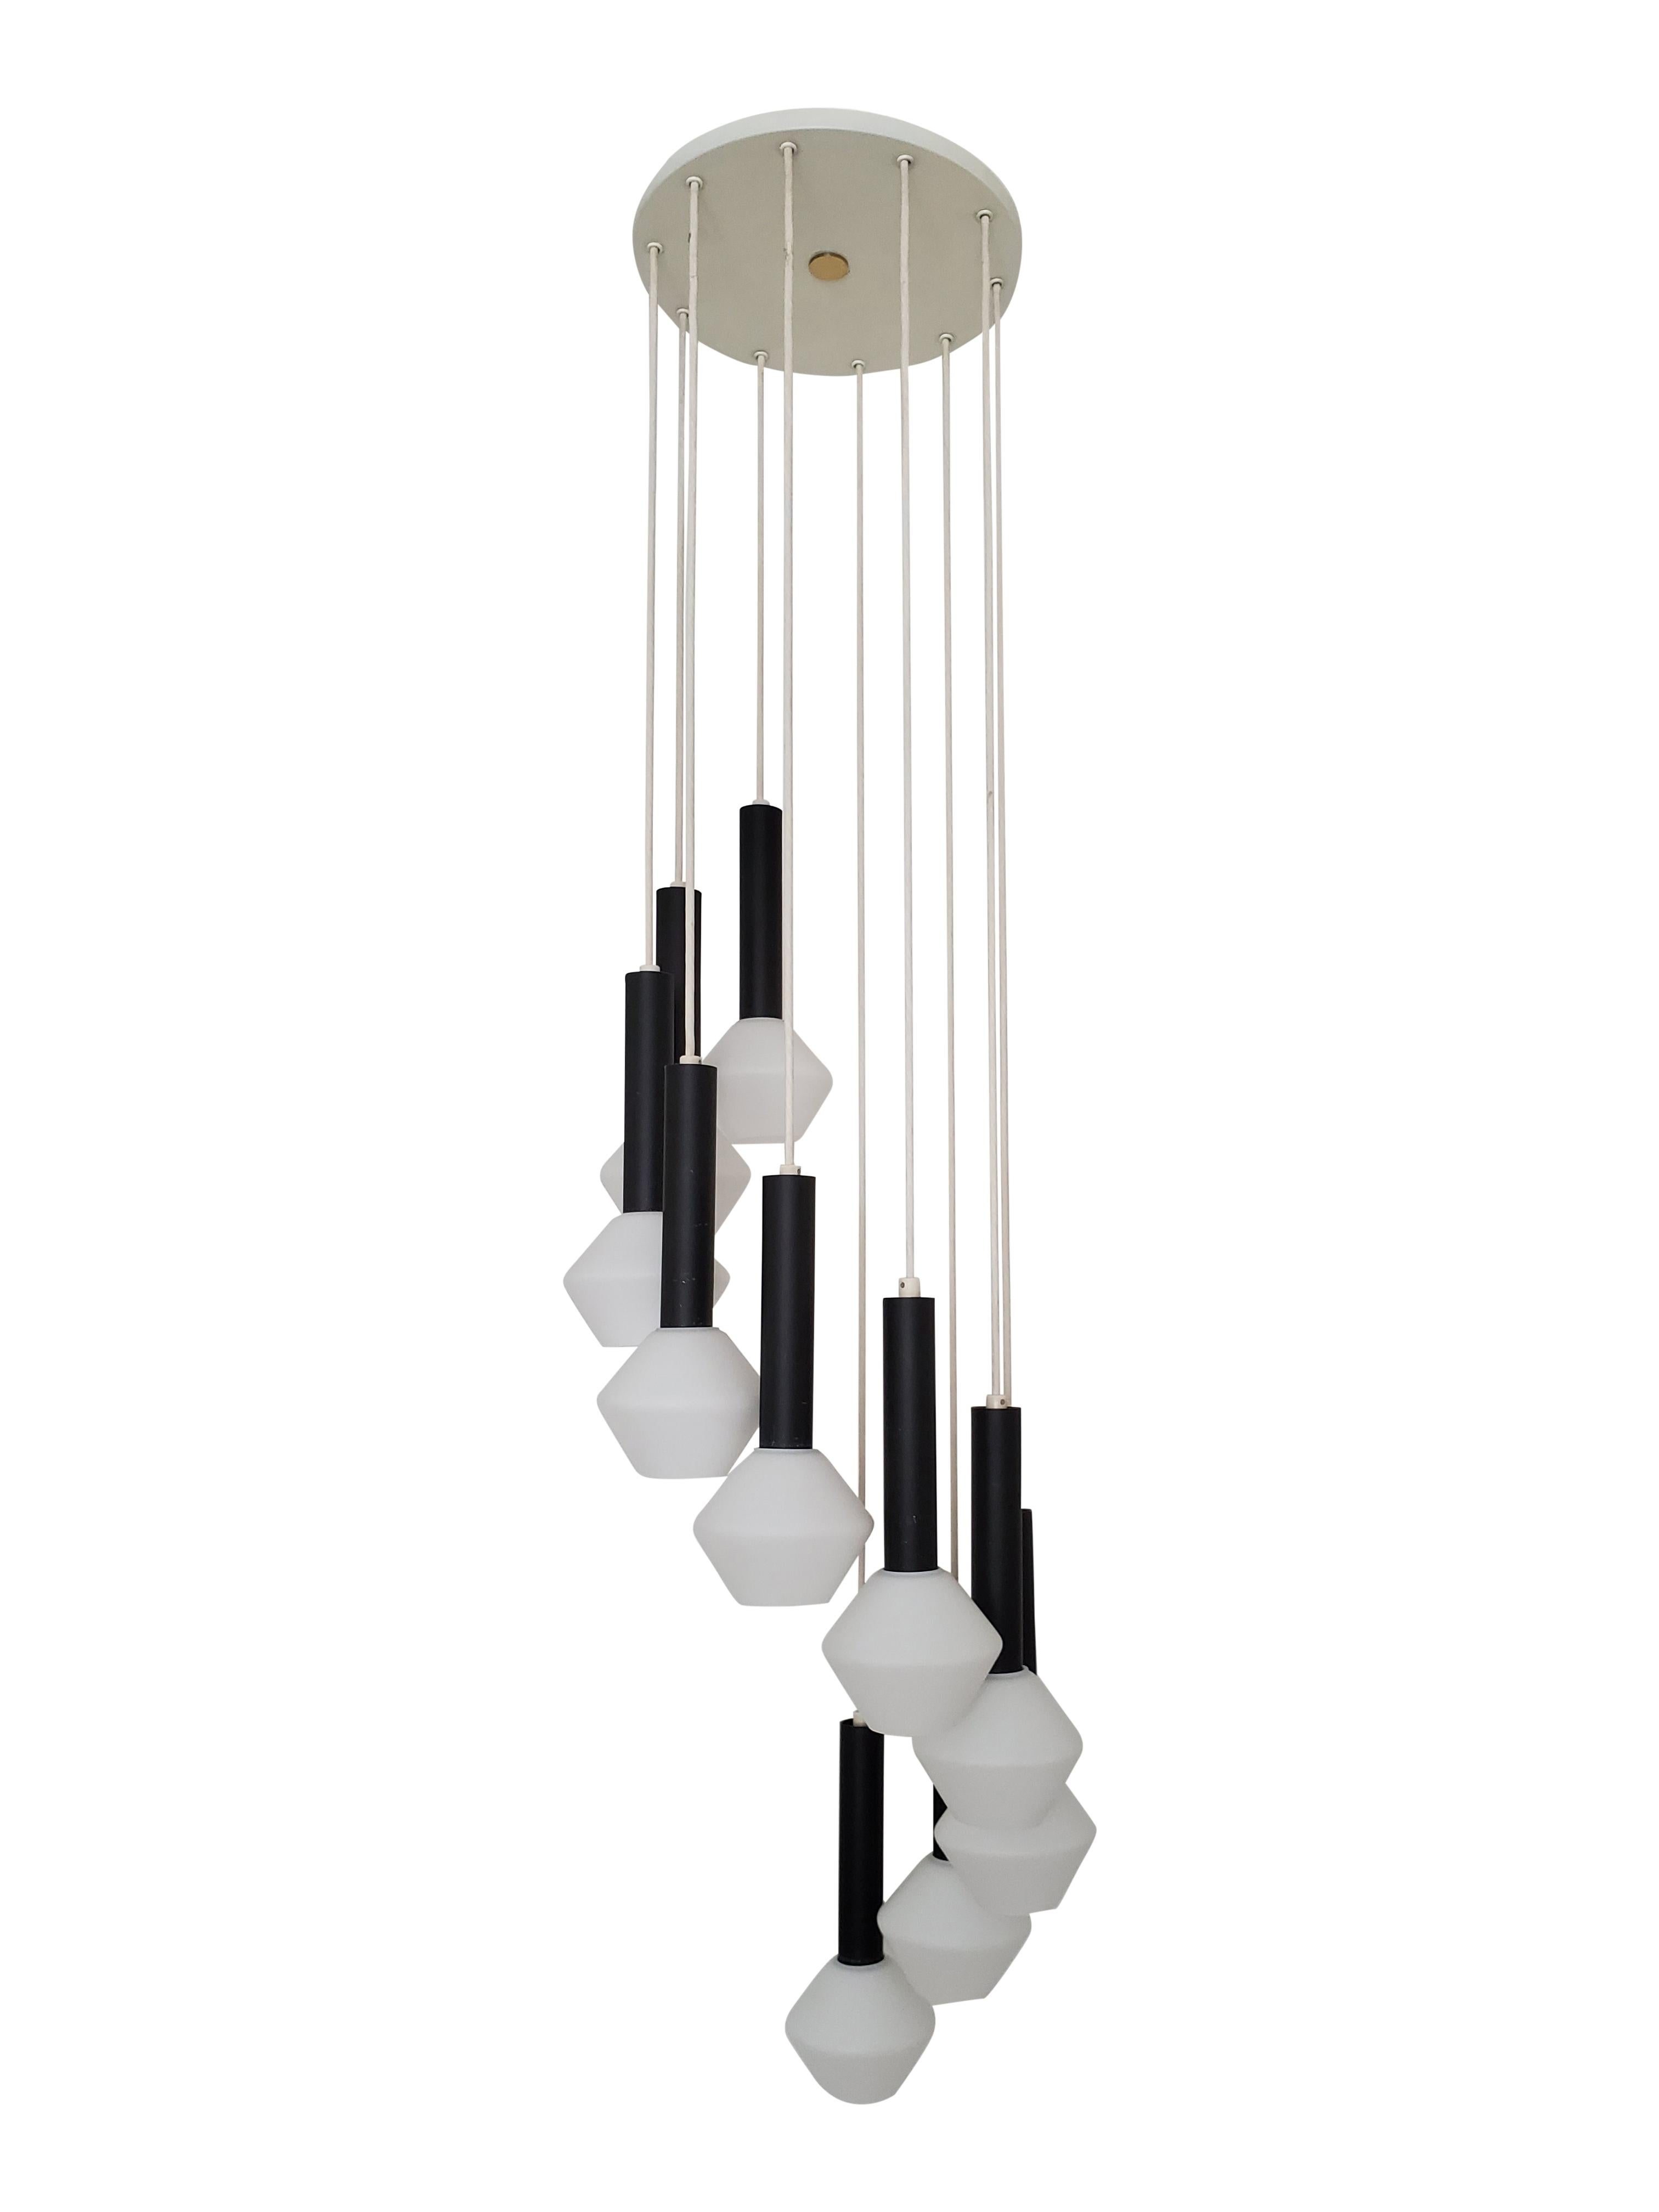 Cascading chandalier by Tapio Wirkkala for Oy Airam AB, Finland 

Pendant heights can be adjusted.